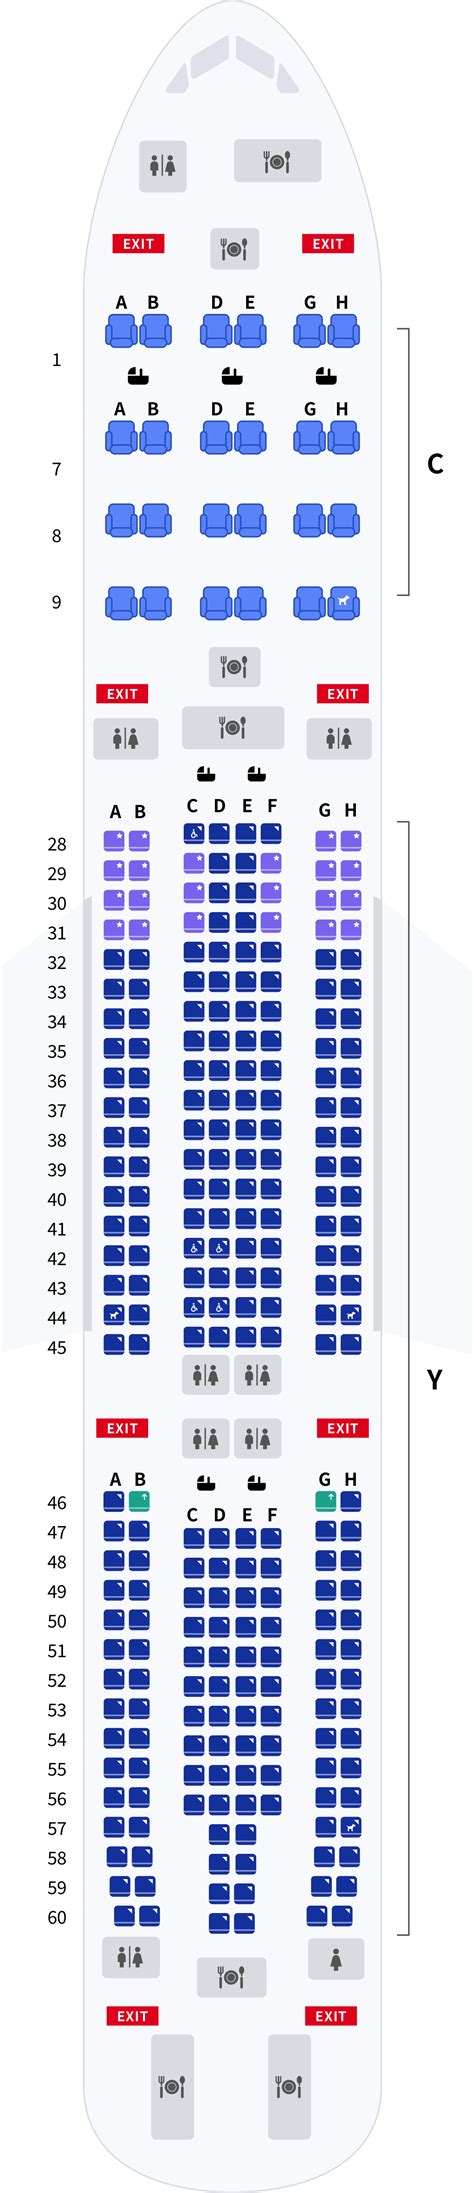 Seating Chart For Airbus A330